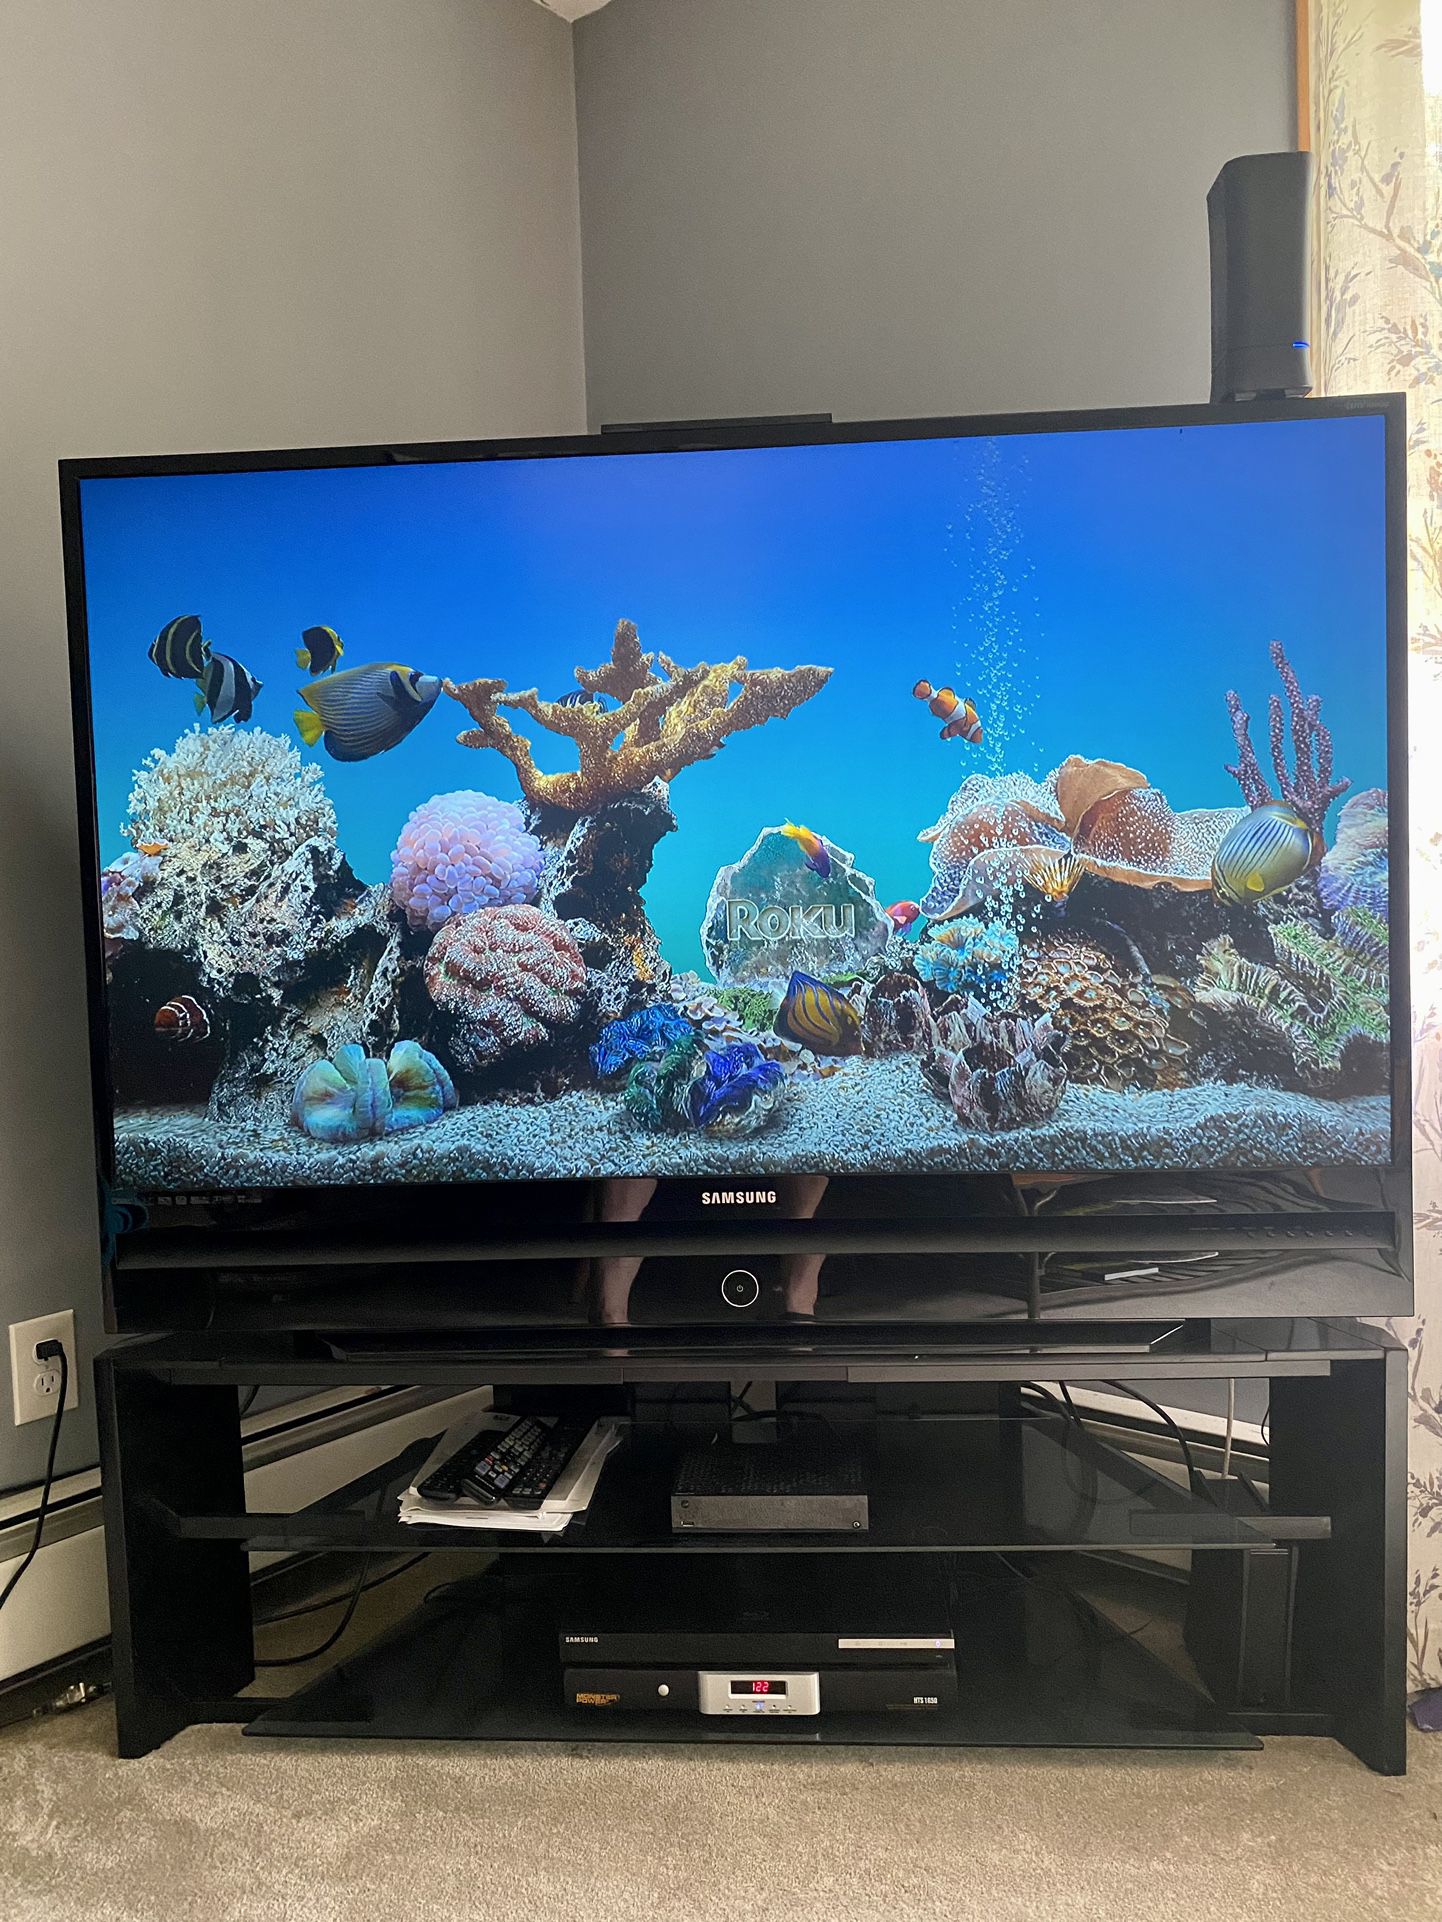 Samsung 61-inch DLP Projection TV